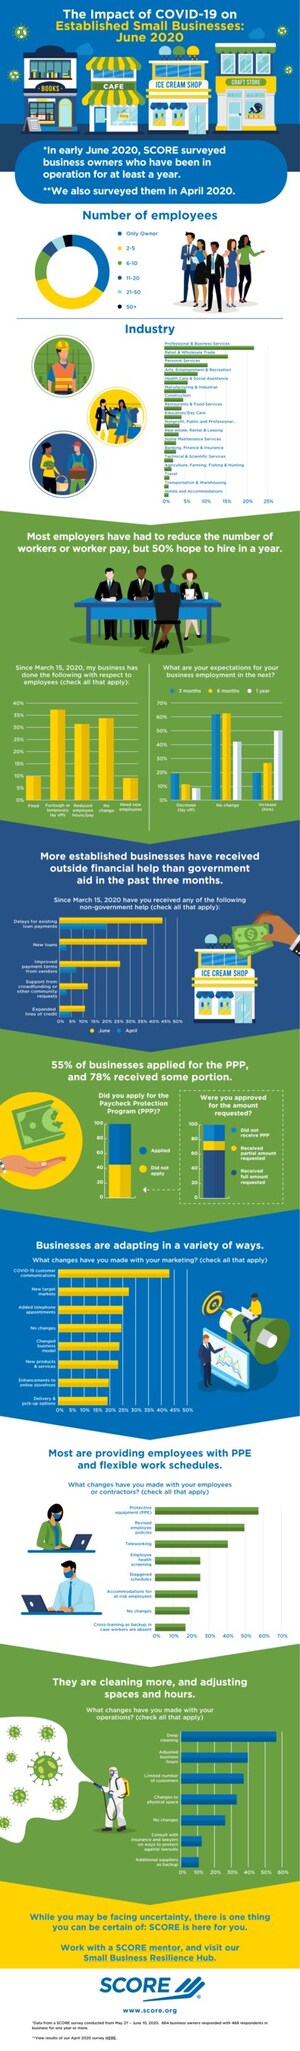 Half of Small Businesses Applied for PPP And 78 Percent Received Some Portion